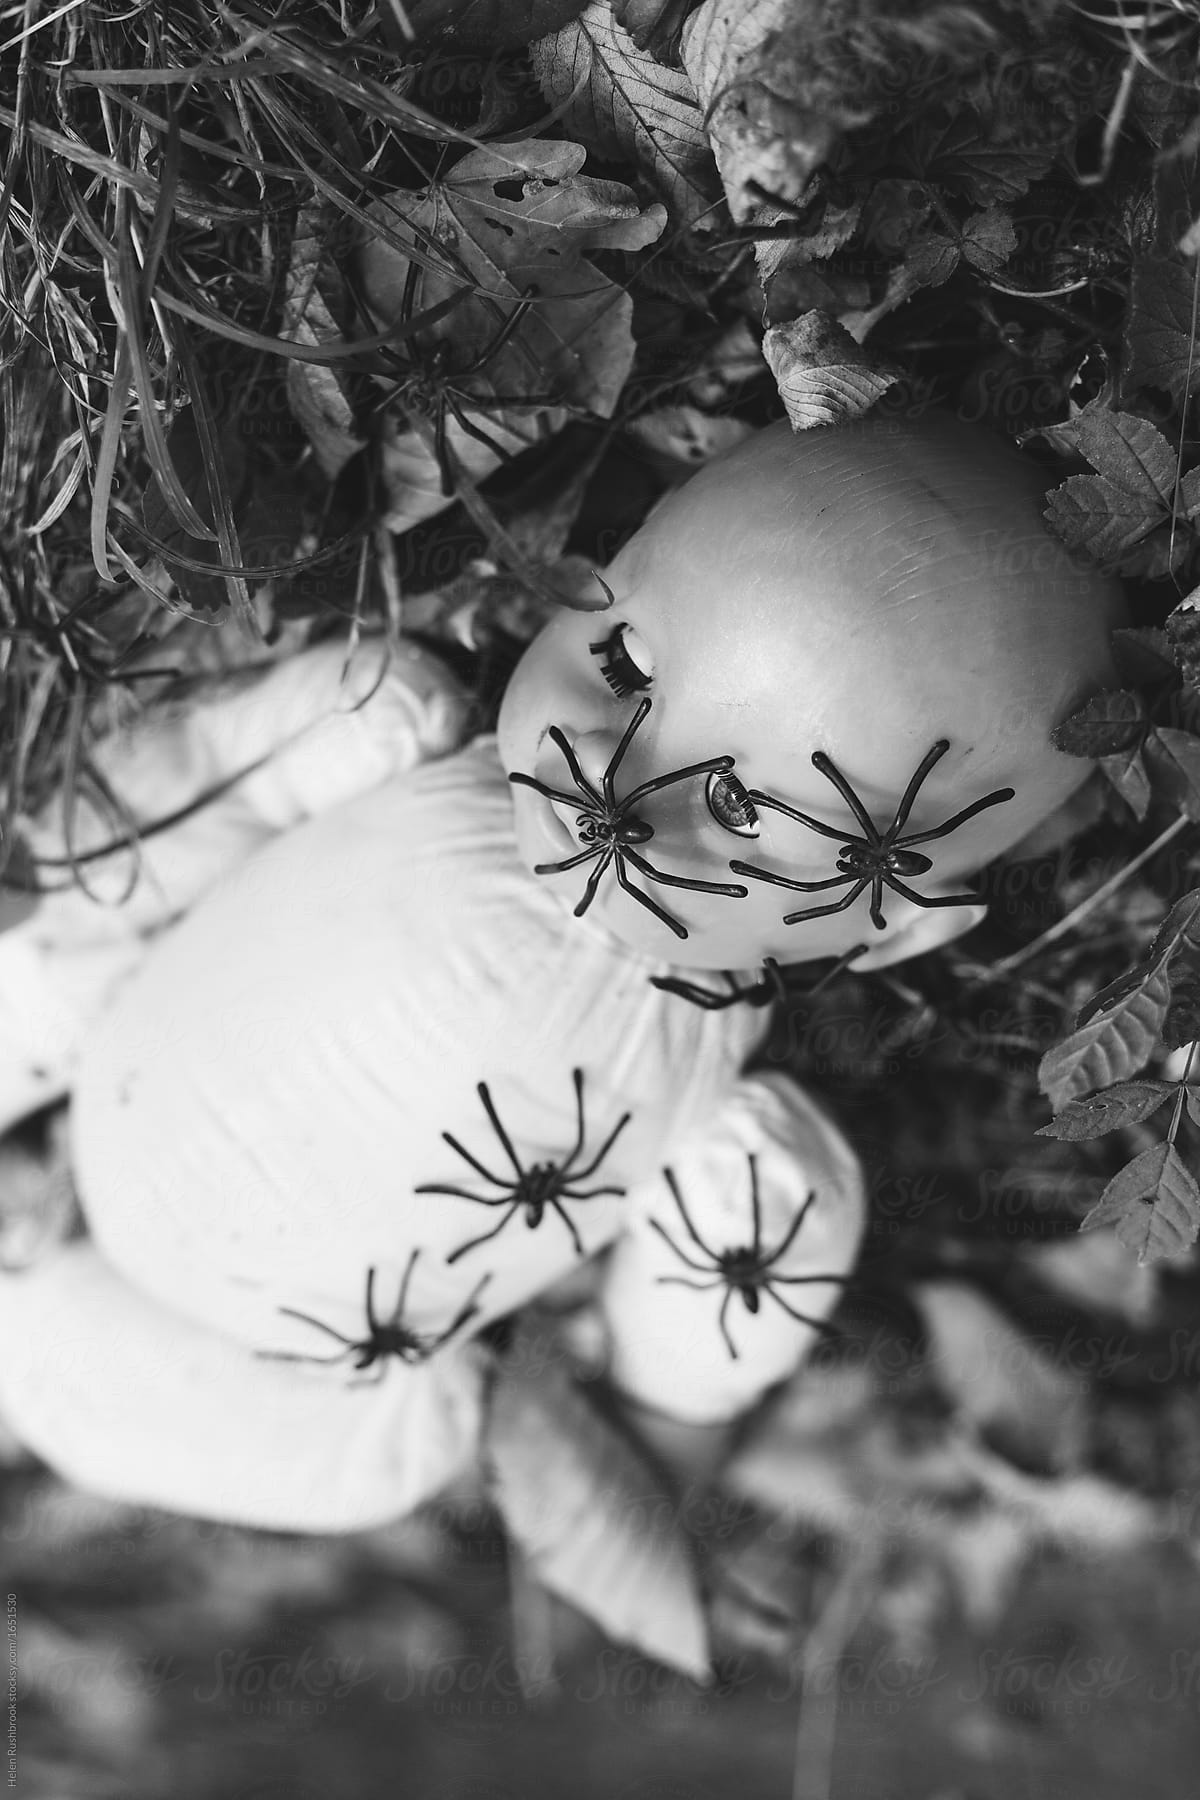 Black and white image of an abandoned child\'s doll, with spiders on its face.